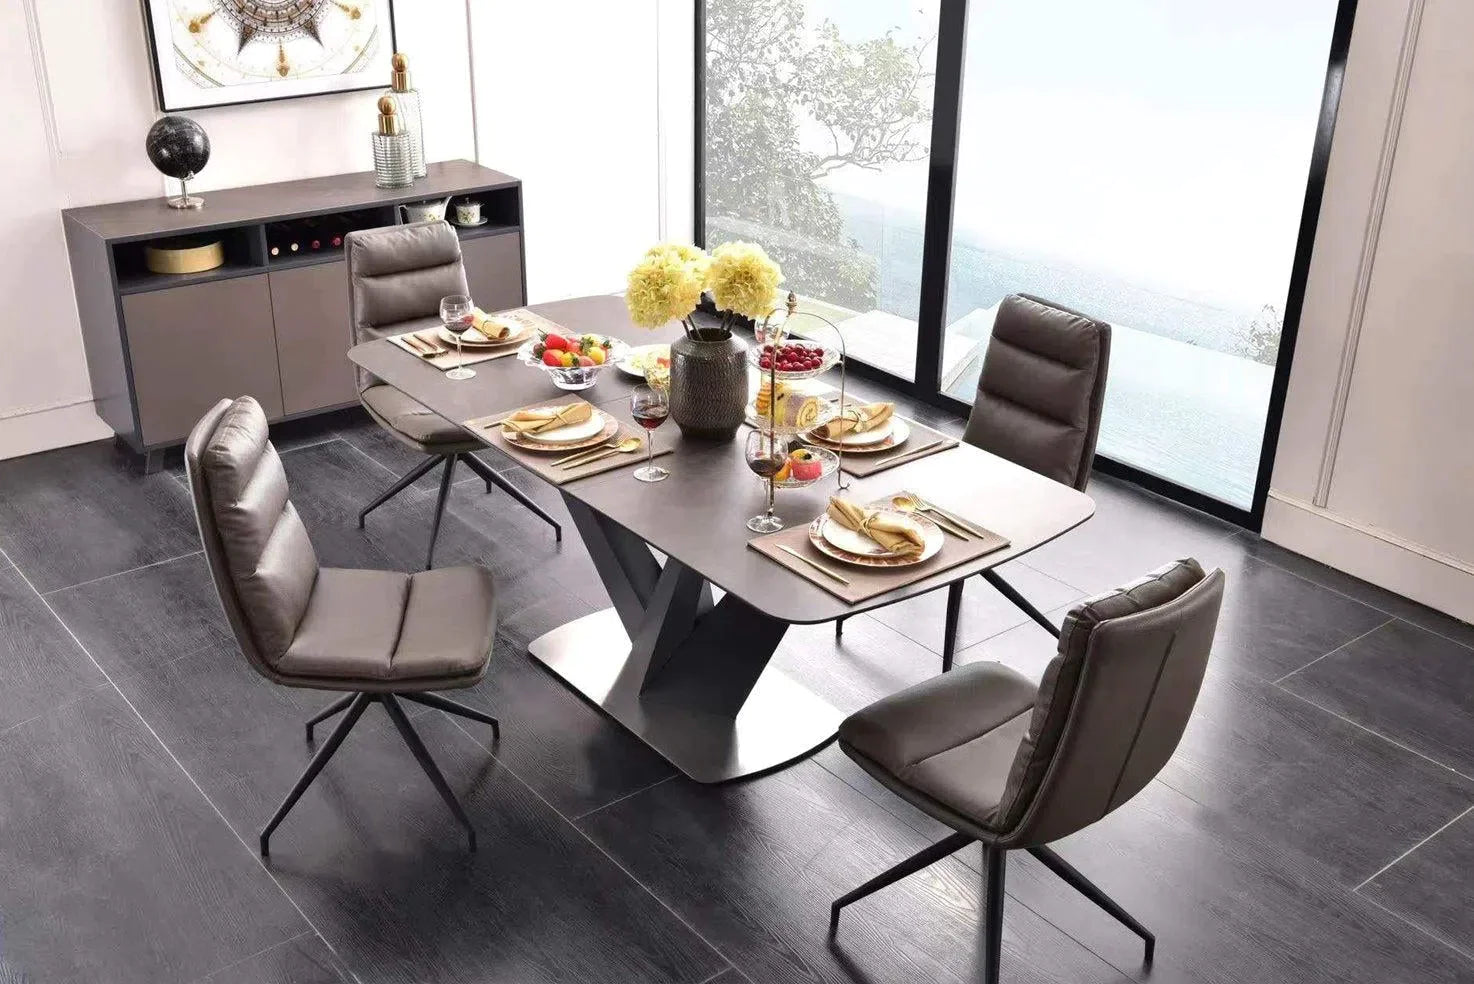 Dining room furniture stores in Perth and Melbourne